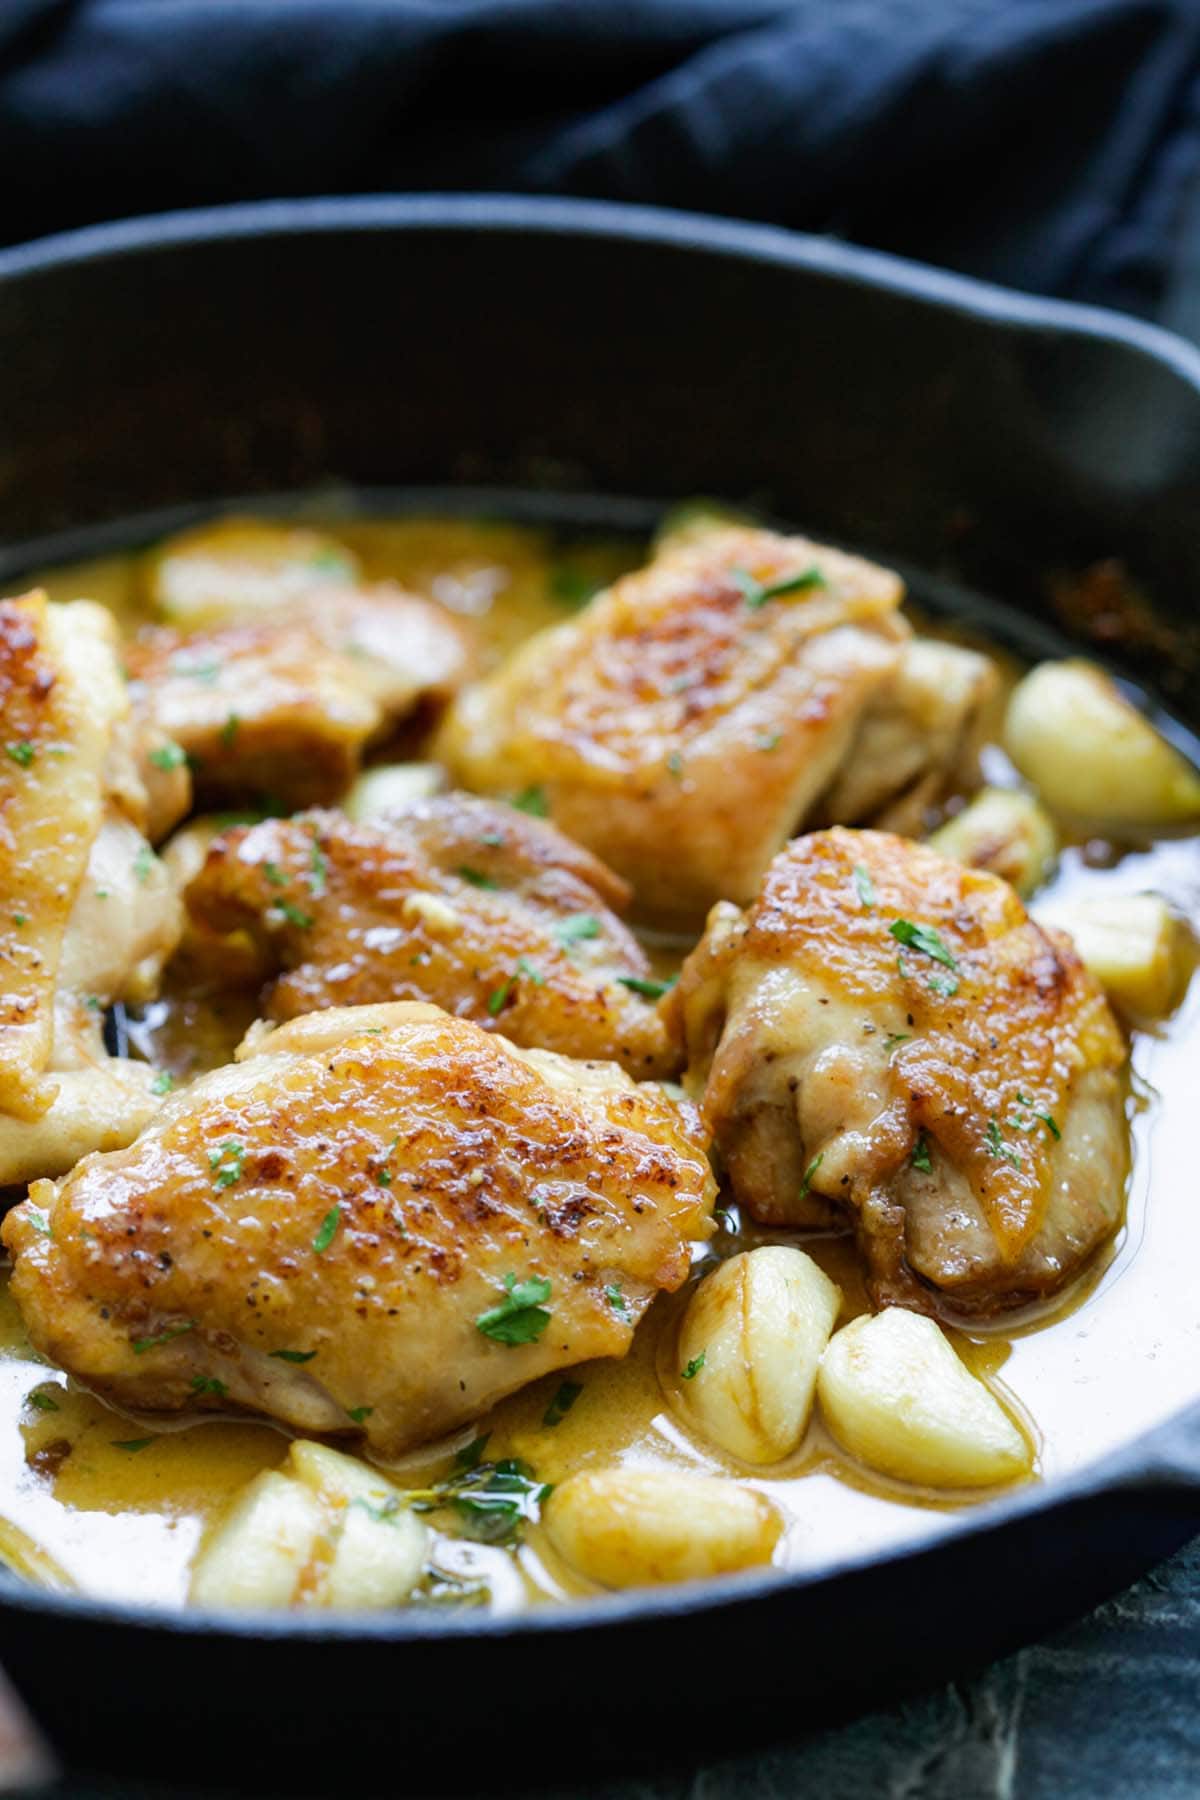 Garlics and chicken thigh with creamy sauce in a cast-iron skillet.